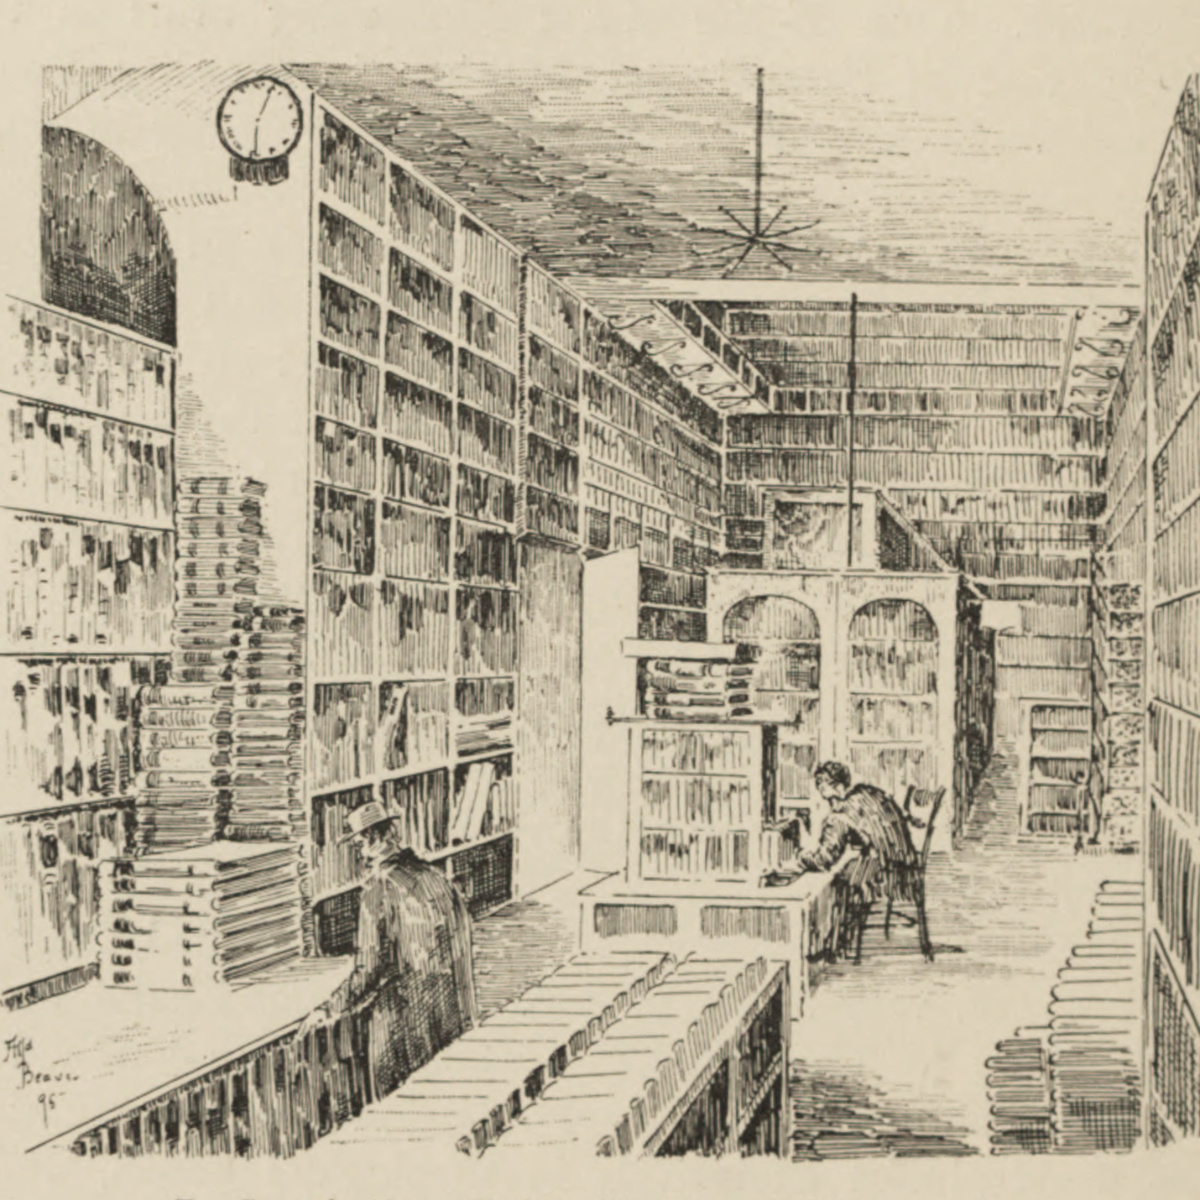 E. George’s (Late Gladding’s Shop), Whitechapel Road. Illustration from W. Roberts, The Book-Hunter in London: Historical and Other Studies of Collectors and Collecting (Chicago: A. C. McClurg & Co., 1895), 188. Courtesy of the Internet Archive (https://archive.org/details/bookhunterinlond00robeuoft).